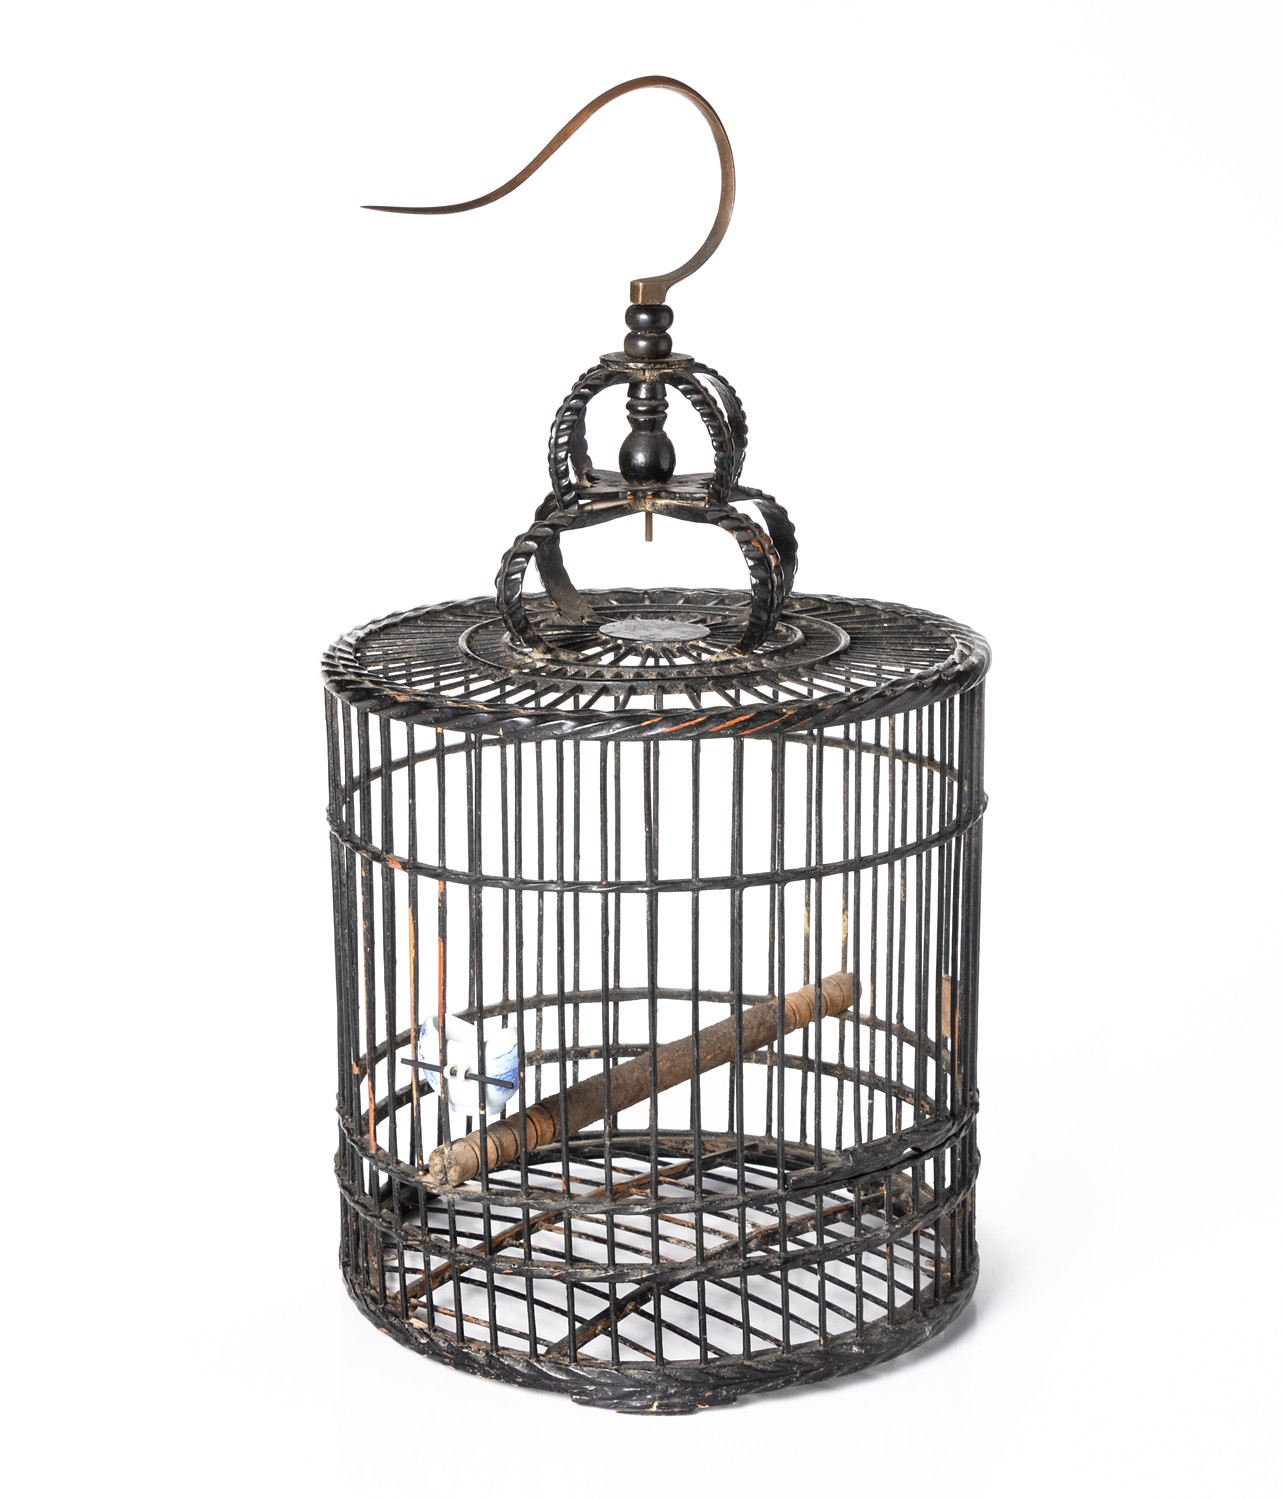 A CHINESE BLACK LACQUER BAMBOO BIRDCAGE, QING DYNASTY, LATE 19TH CENTURY